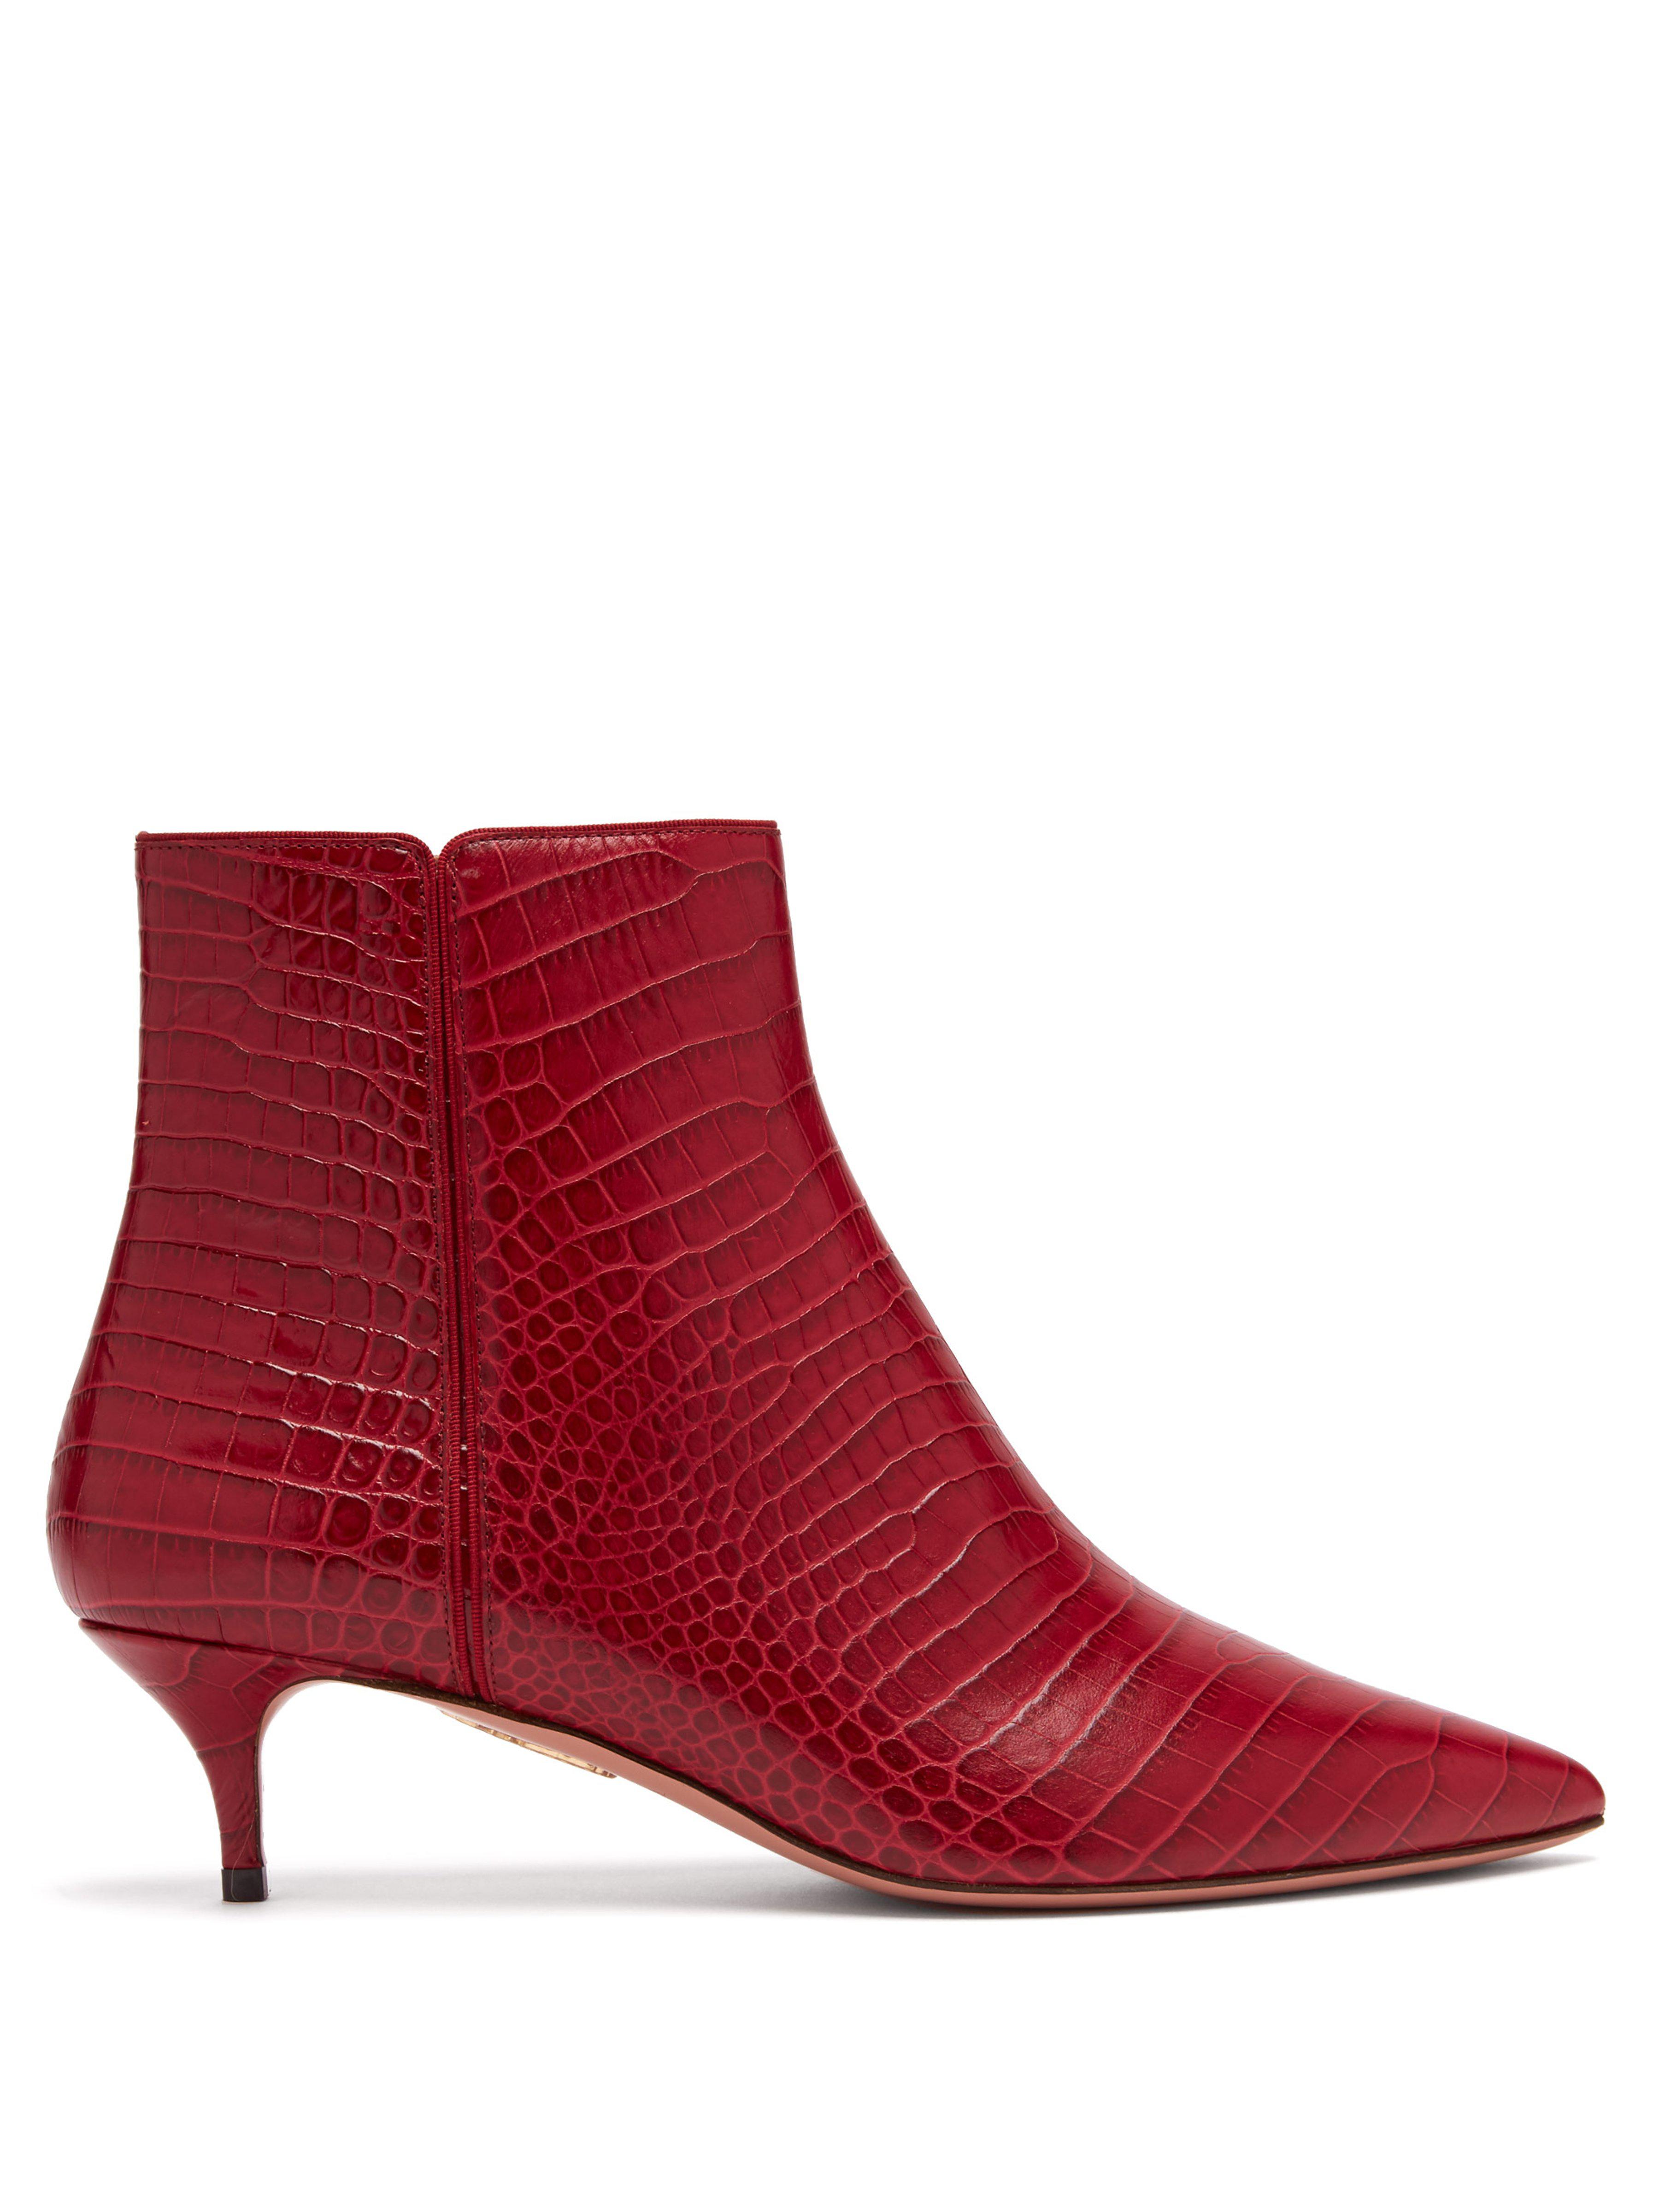 Aquazzura Editor 45 Crocodile Effect Leather Ankle Boots in Red - Lyst